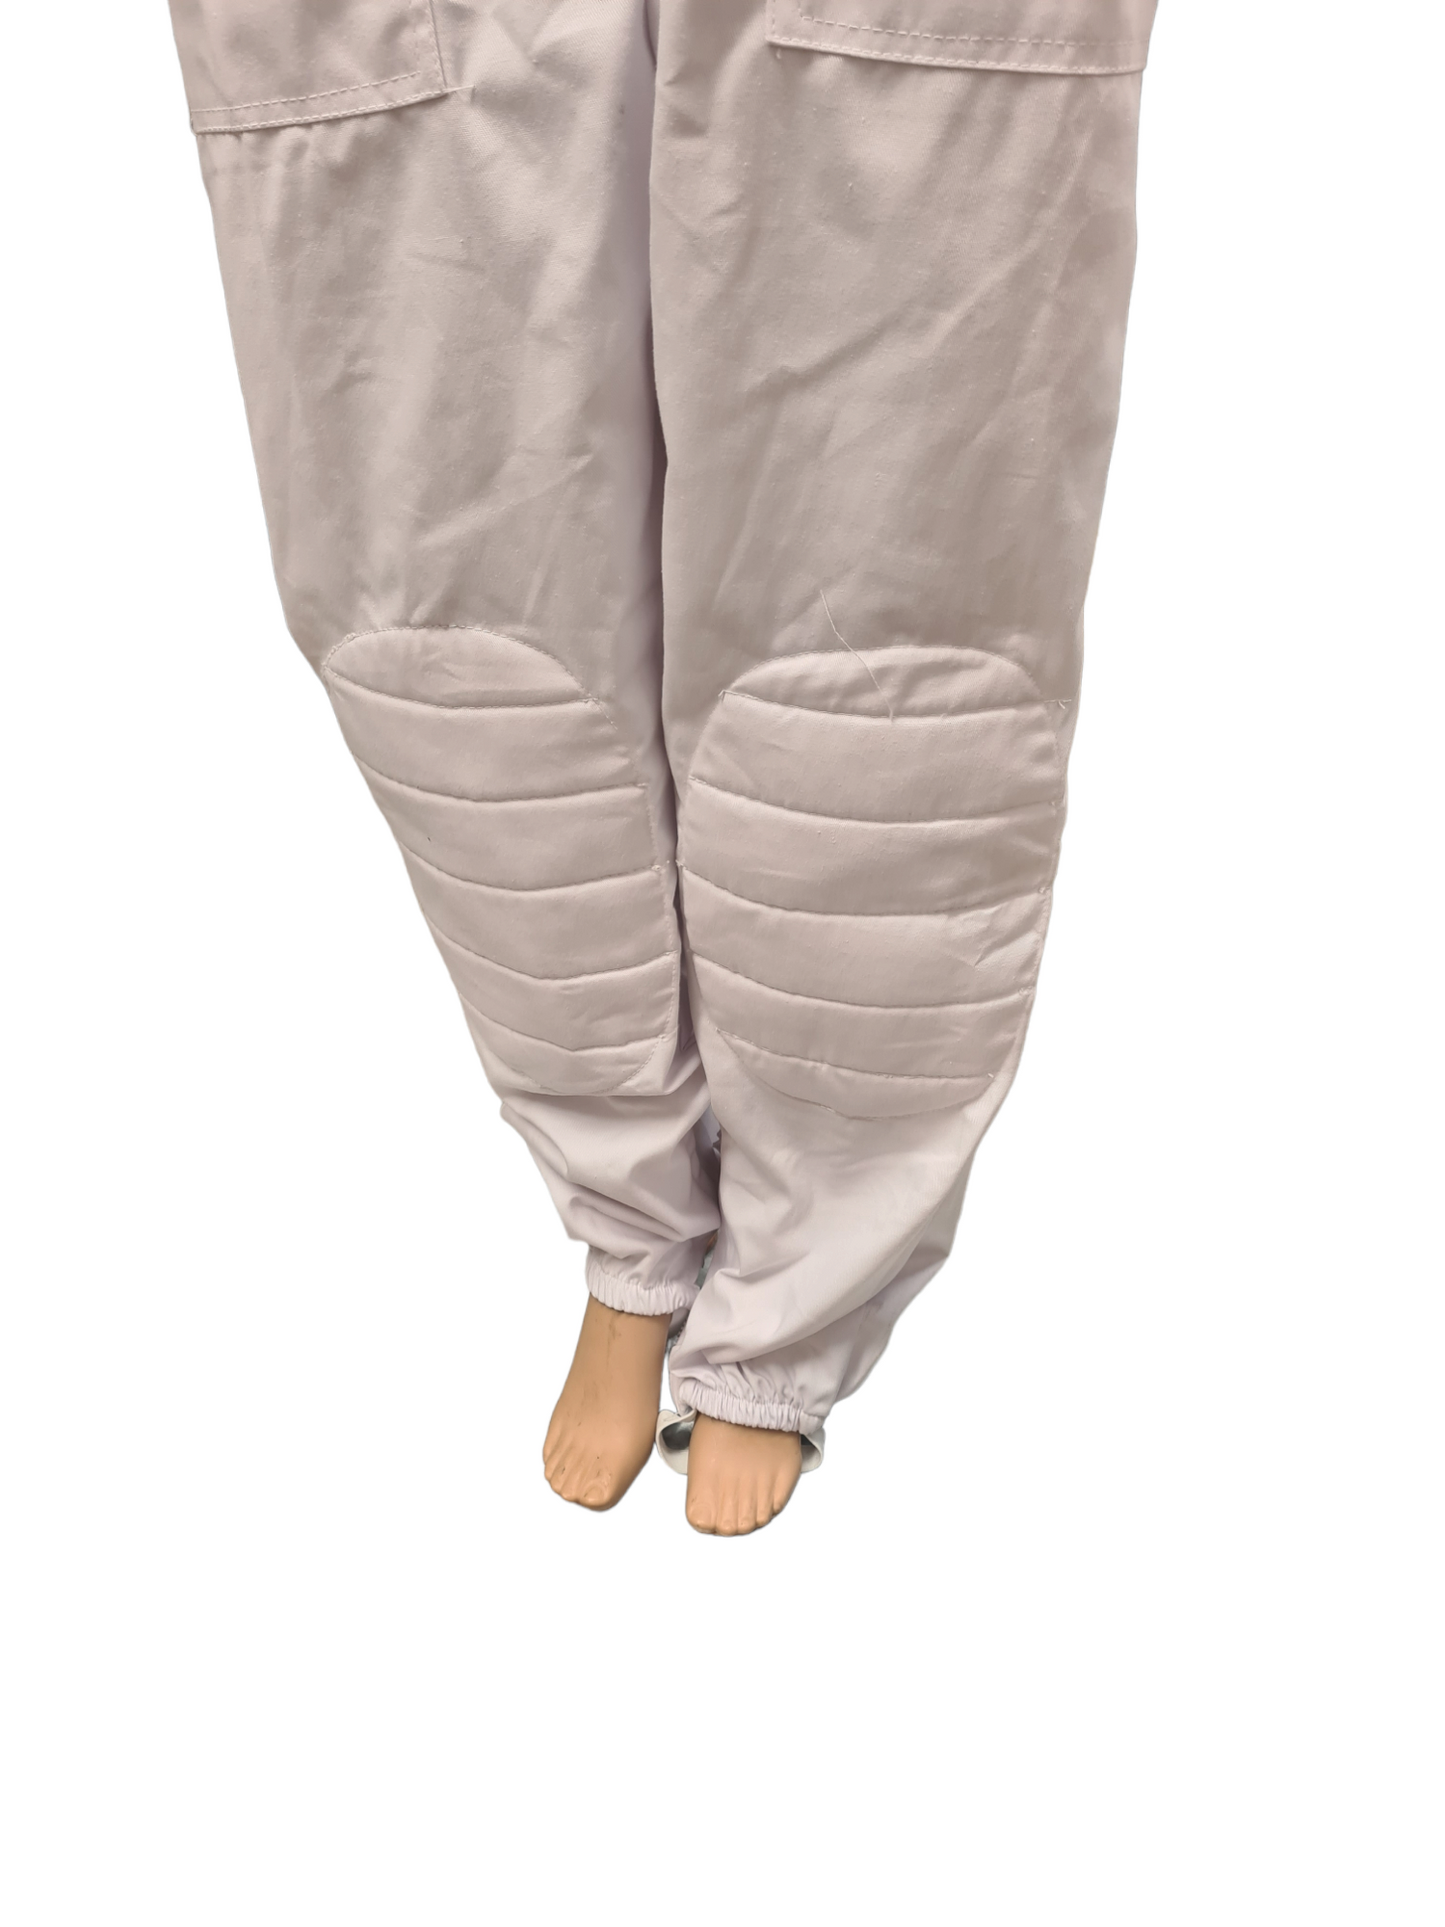 MBP Poly Cotton Semi Ventilated Beekeeping Suit